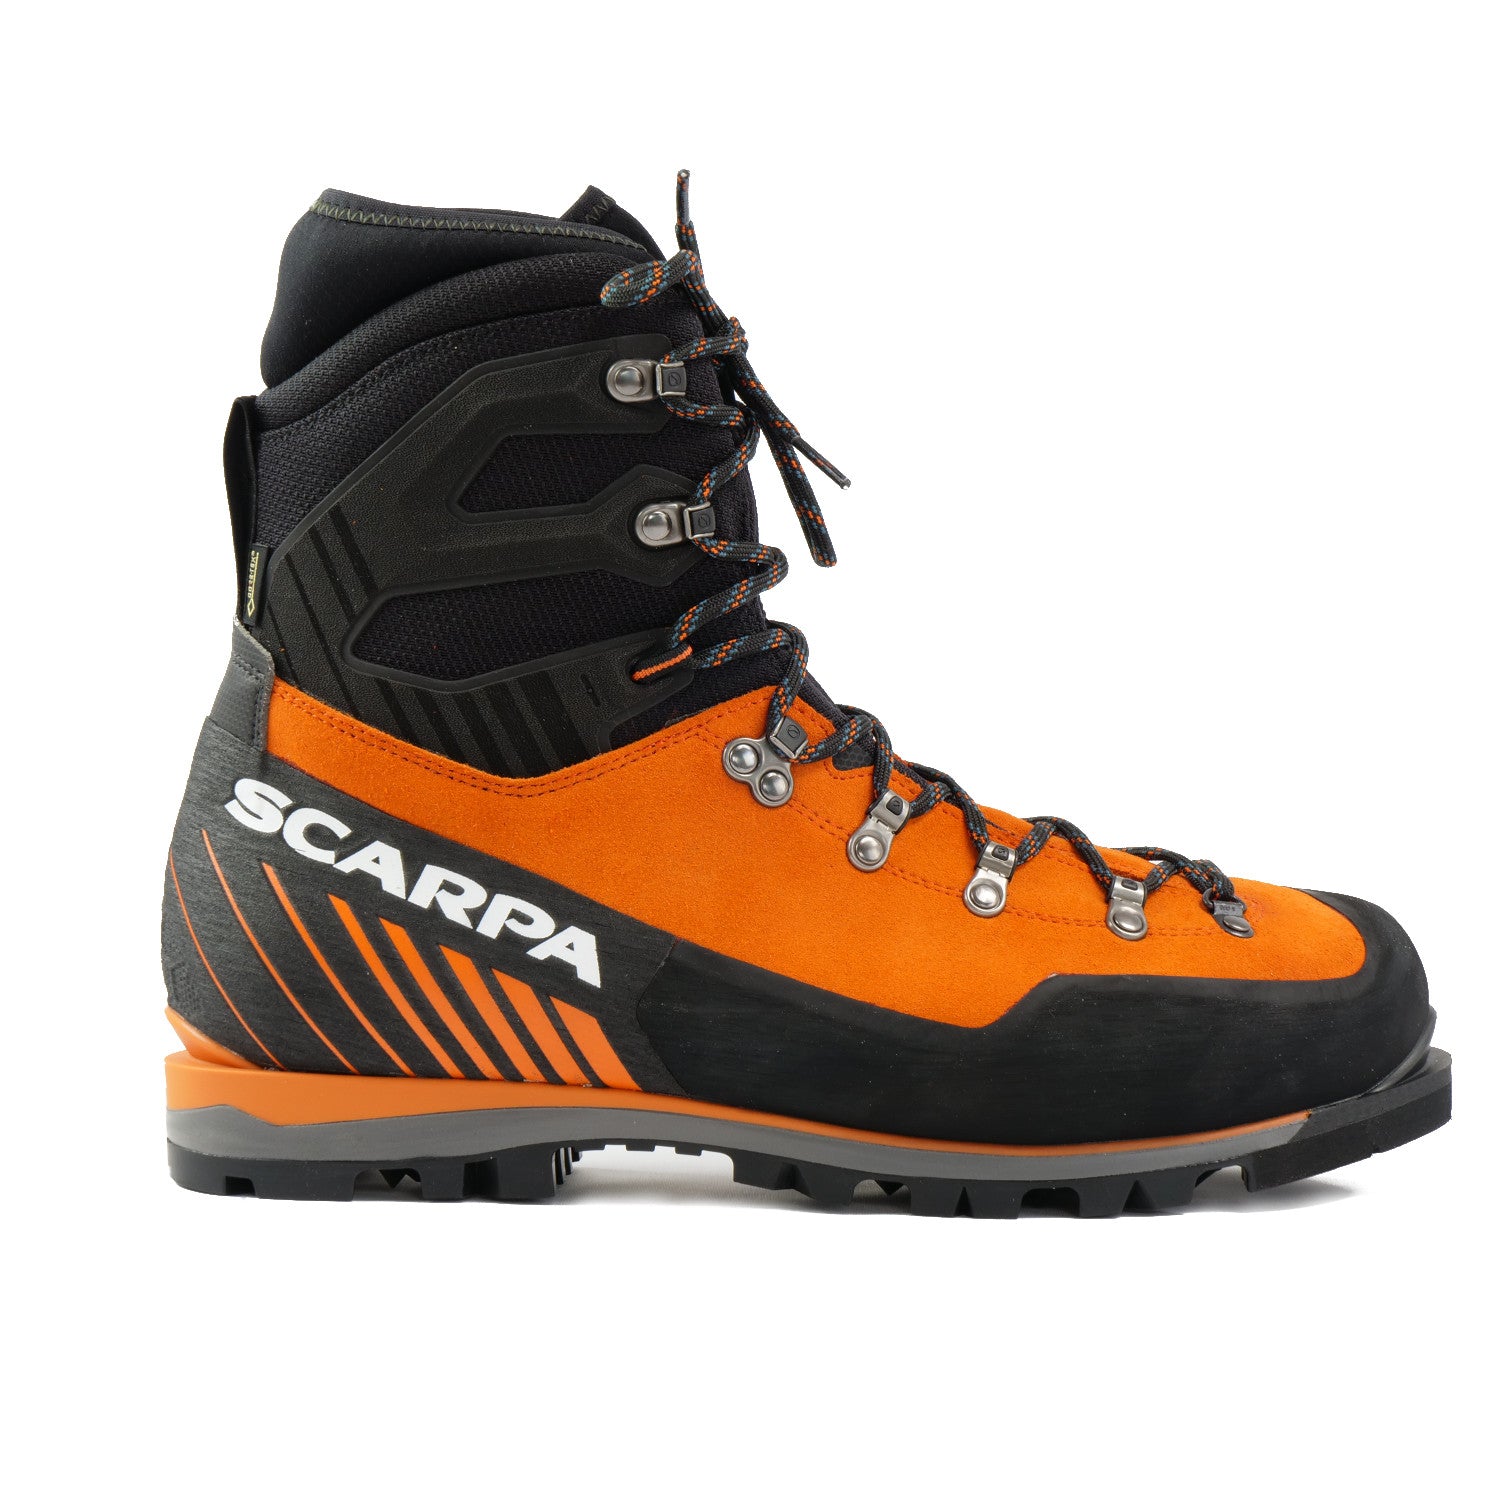 Side view of the Scarpa Mont Blanc Pro GTX with orange Perwanger outer and black rubber and flexible sock and large scarpa logo in white